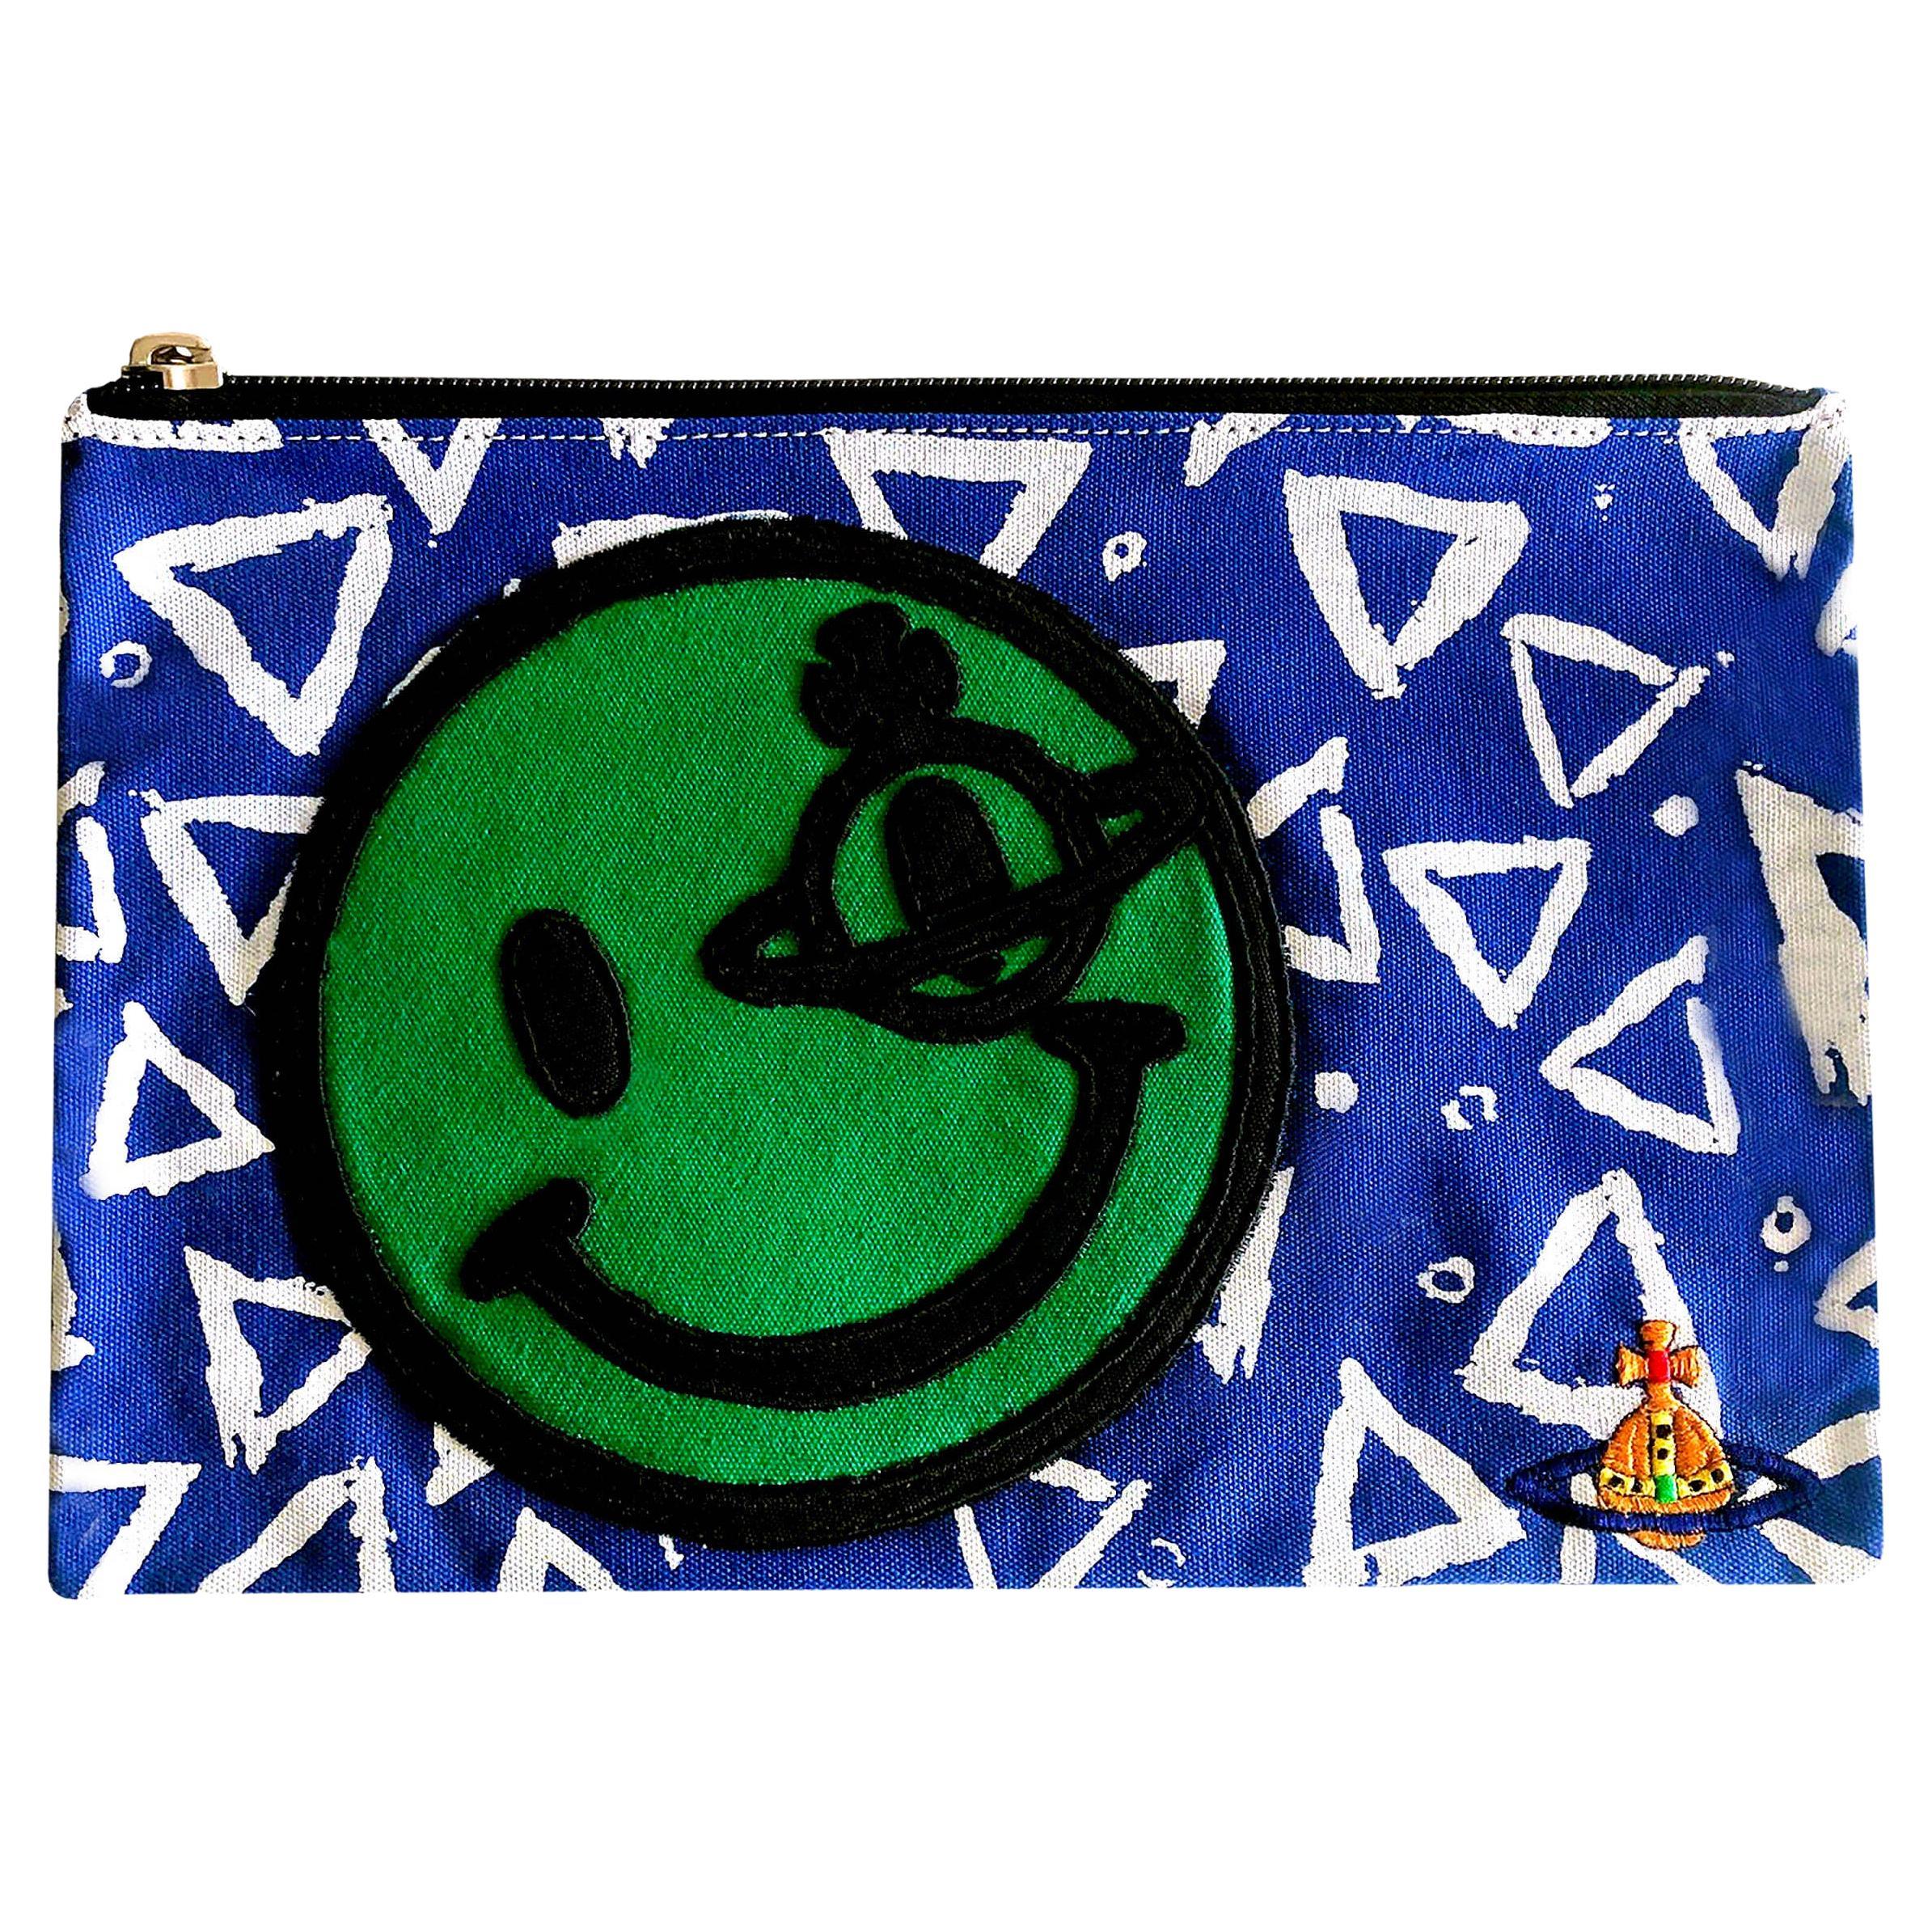 Vivienne Westwood - Smiley Zip Pouch / Bag - Embroidered Detailing - NEW For Sale